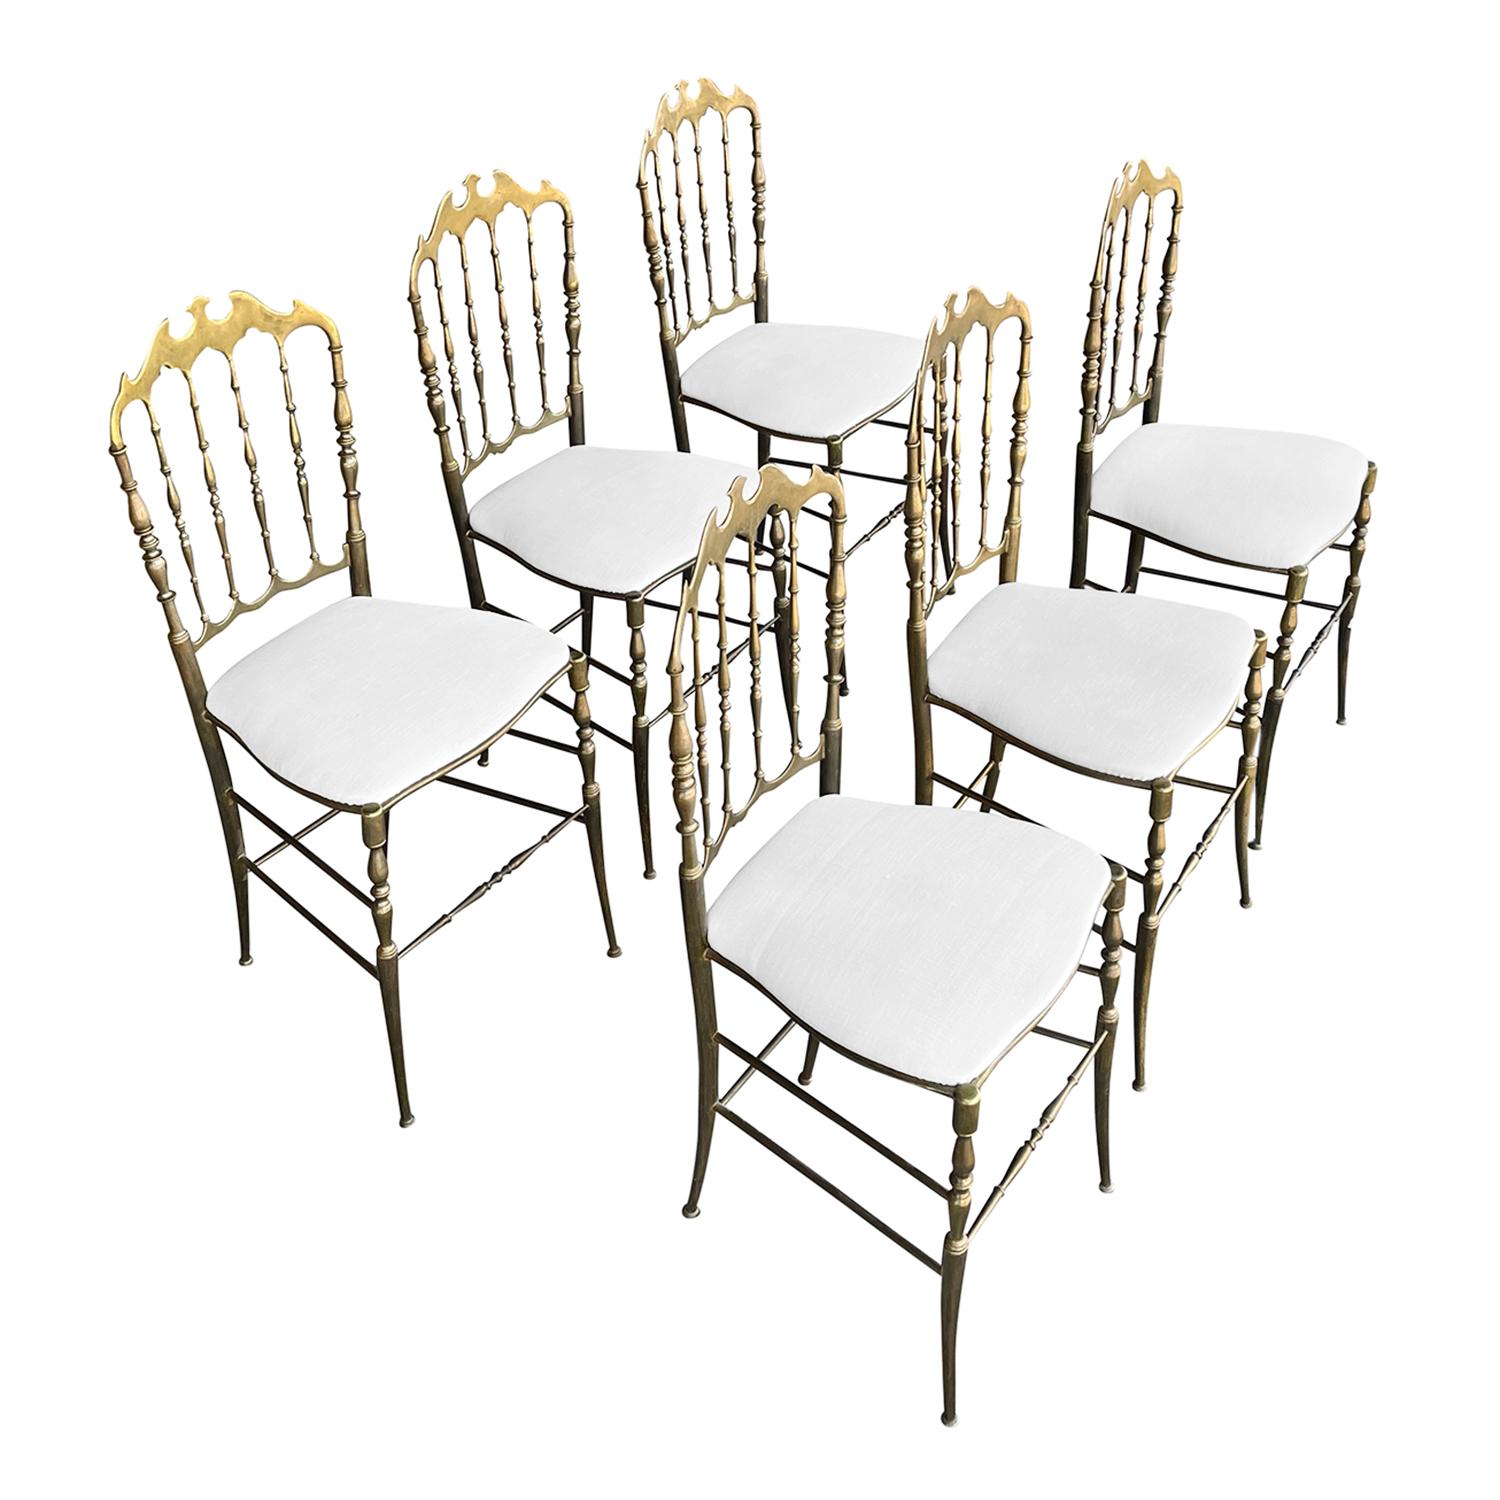 Art Deco 20th Century White Italian Set of Six Modernist Brass Dining Chairs by Chiavari For Sale